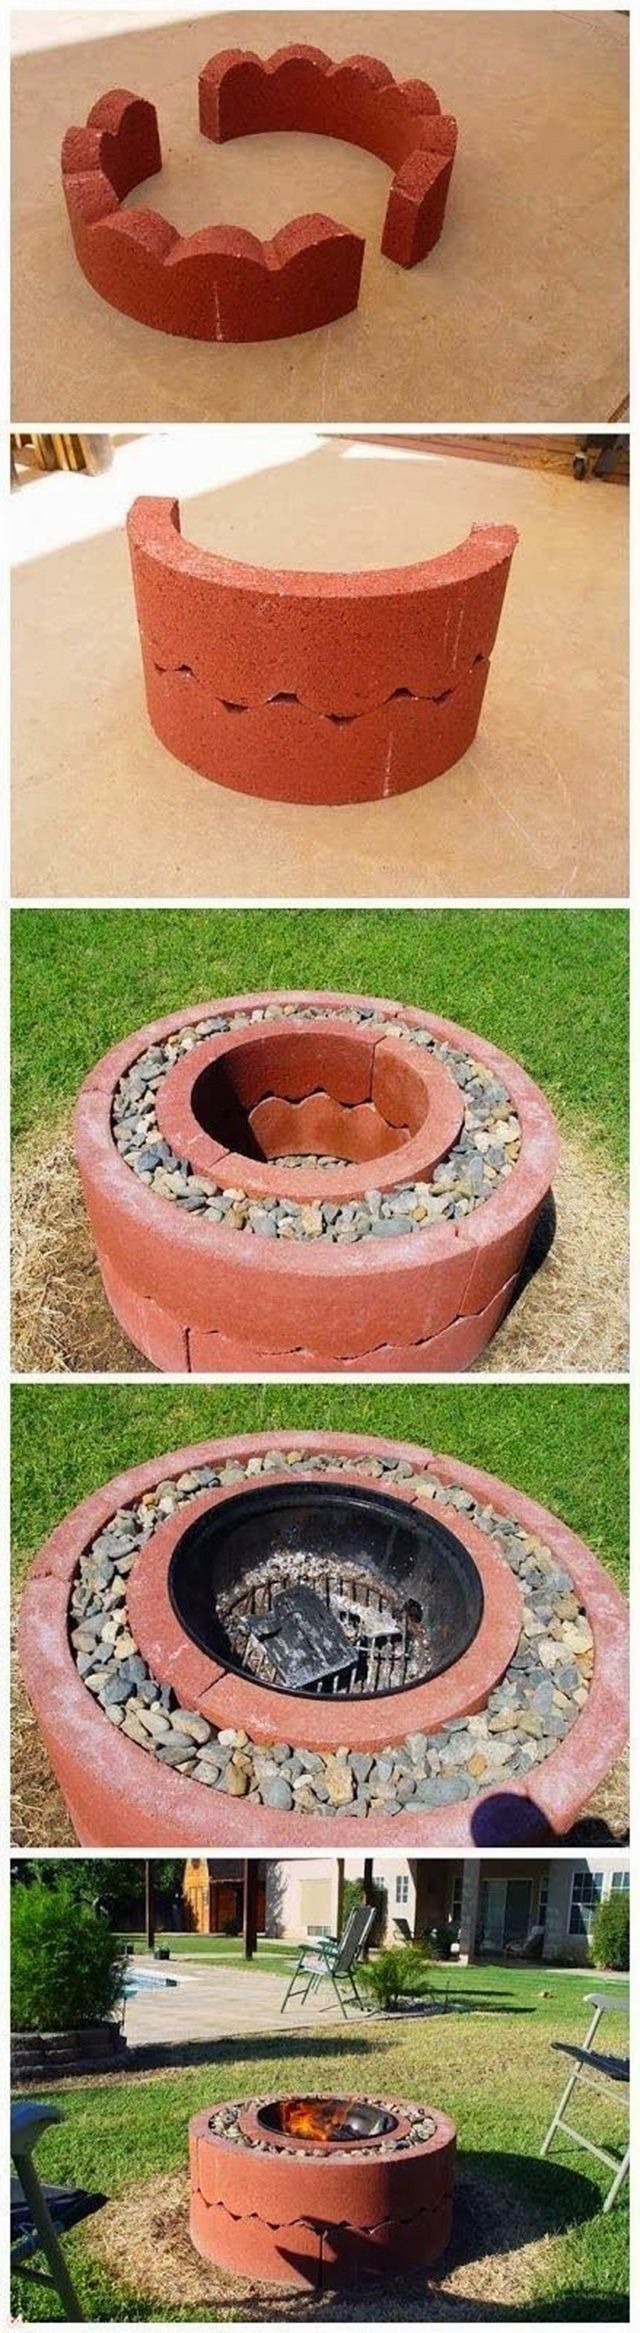 $50 fire pit using concrete tree rings